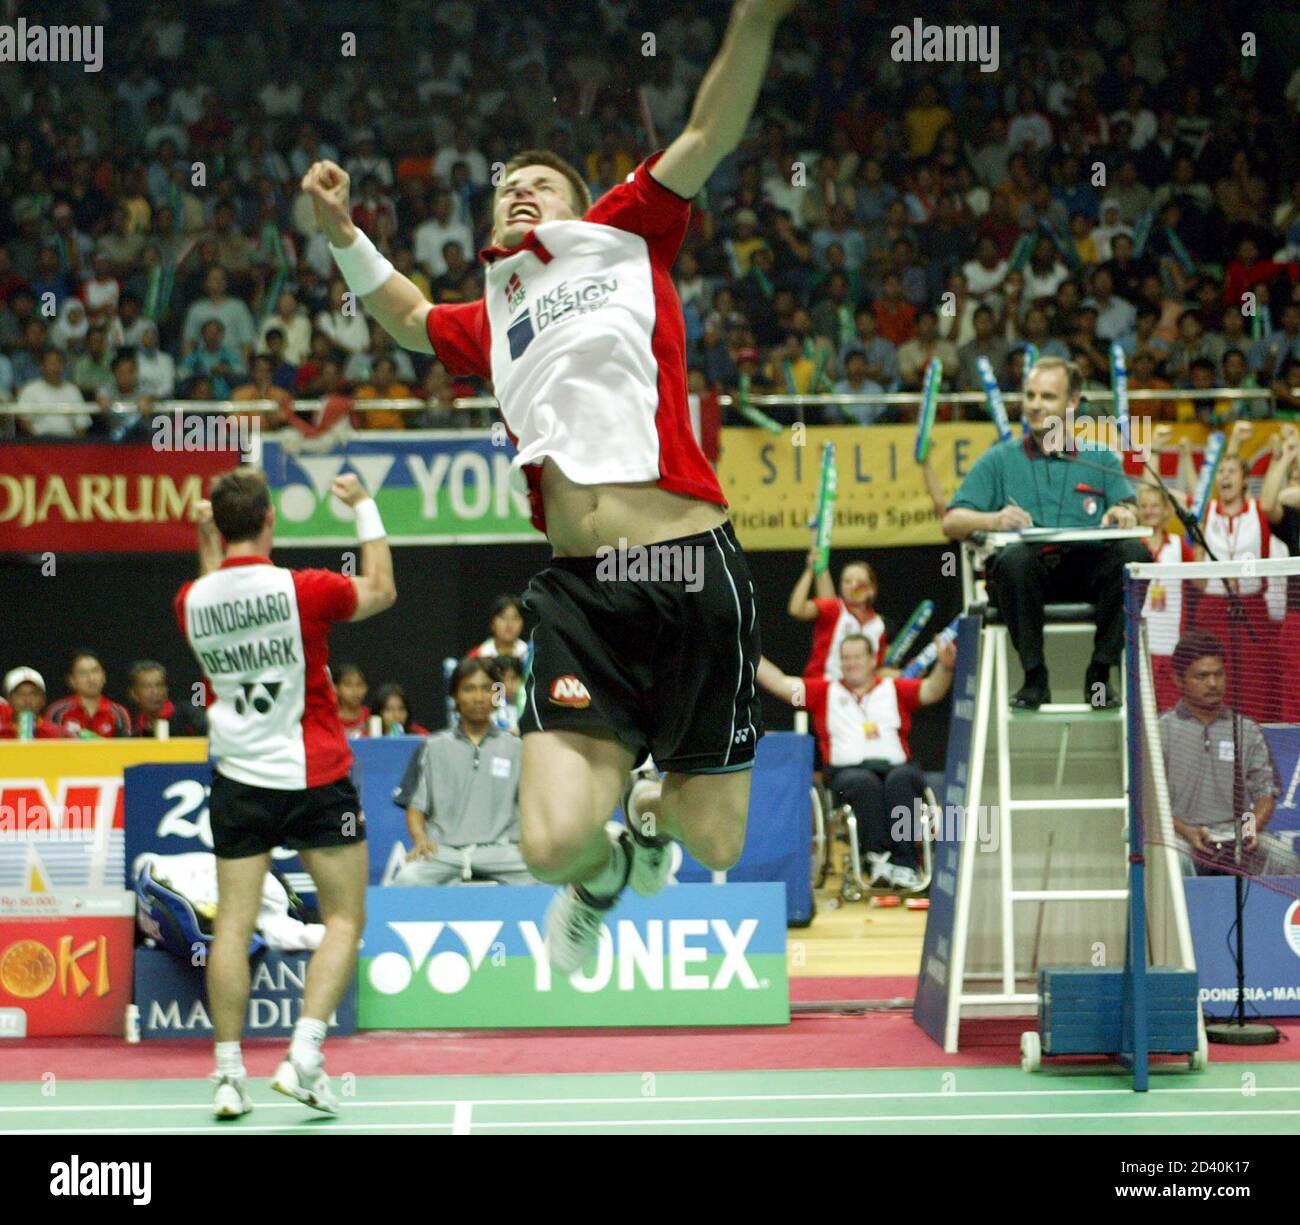 DENMARK JENS ERIKSEN AND MARTIN LUNDGAARD DURING THE SEMIFINAL MATCH OF THE  DOUBLE MAN THOMAS CUP IN JAKARTA. Danish player Jens Eriksen jump while his  partner Martin Lundgaard punches the air after